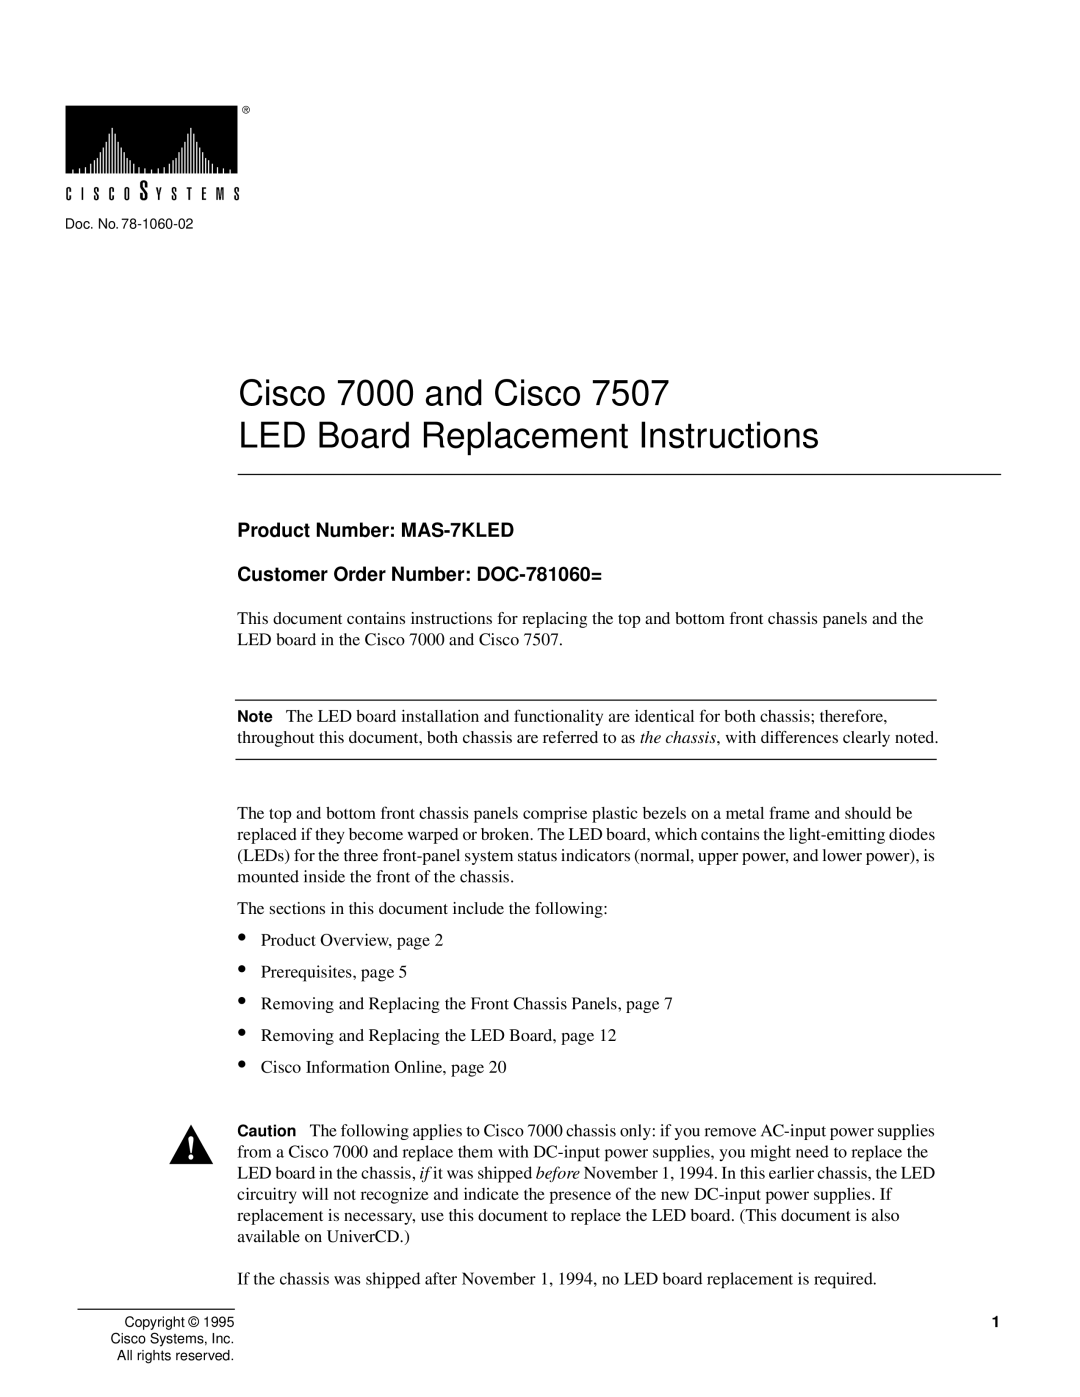 Cisco Systems MAS-7KLED manual Cisco 7000 and Cisco LED Board Replacement Instructions 